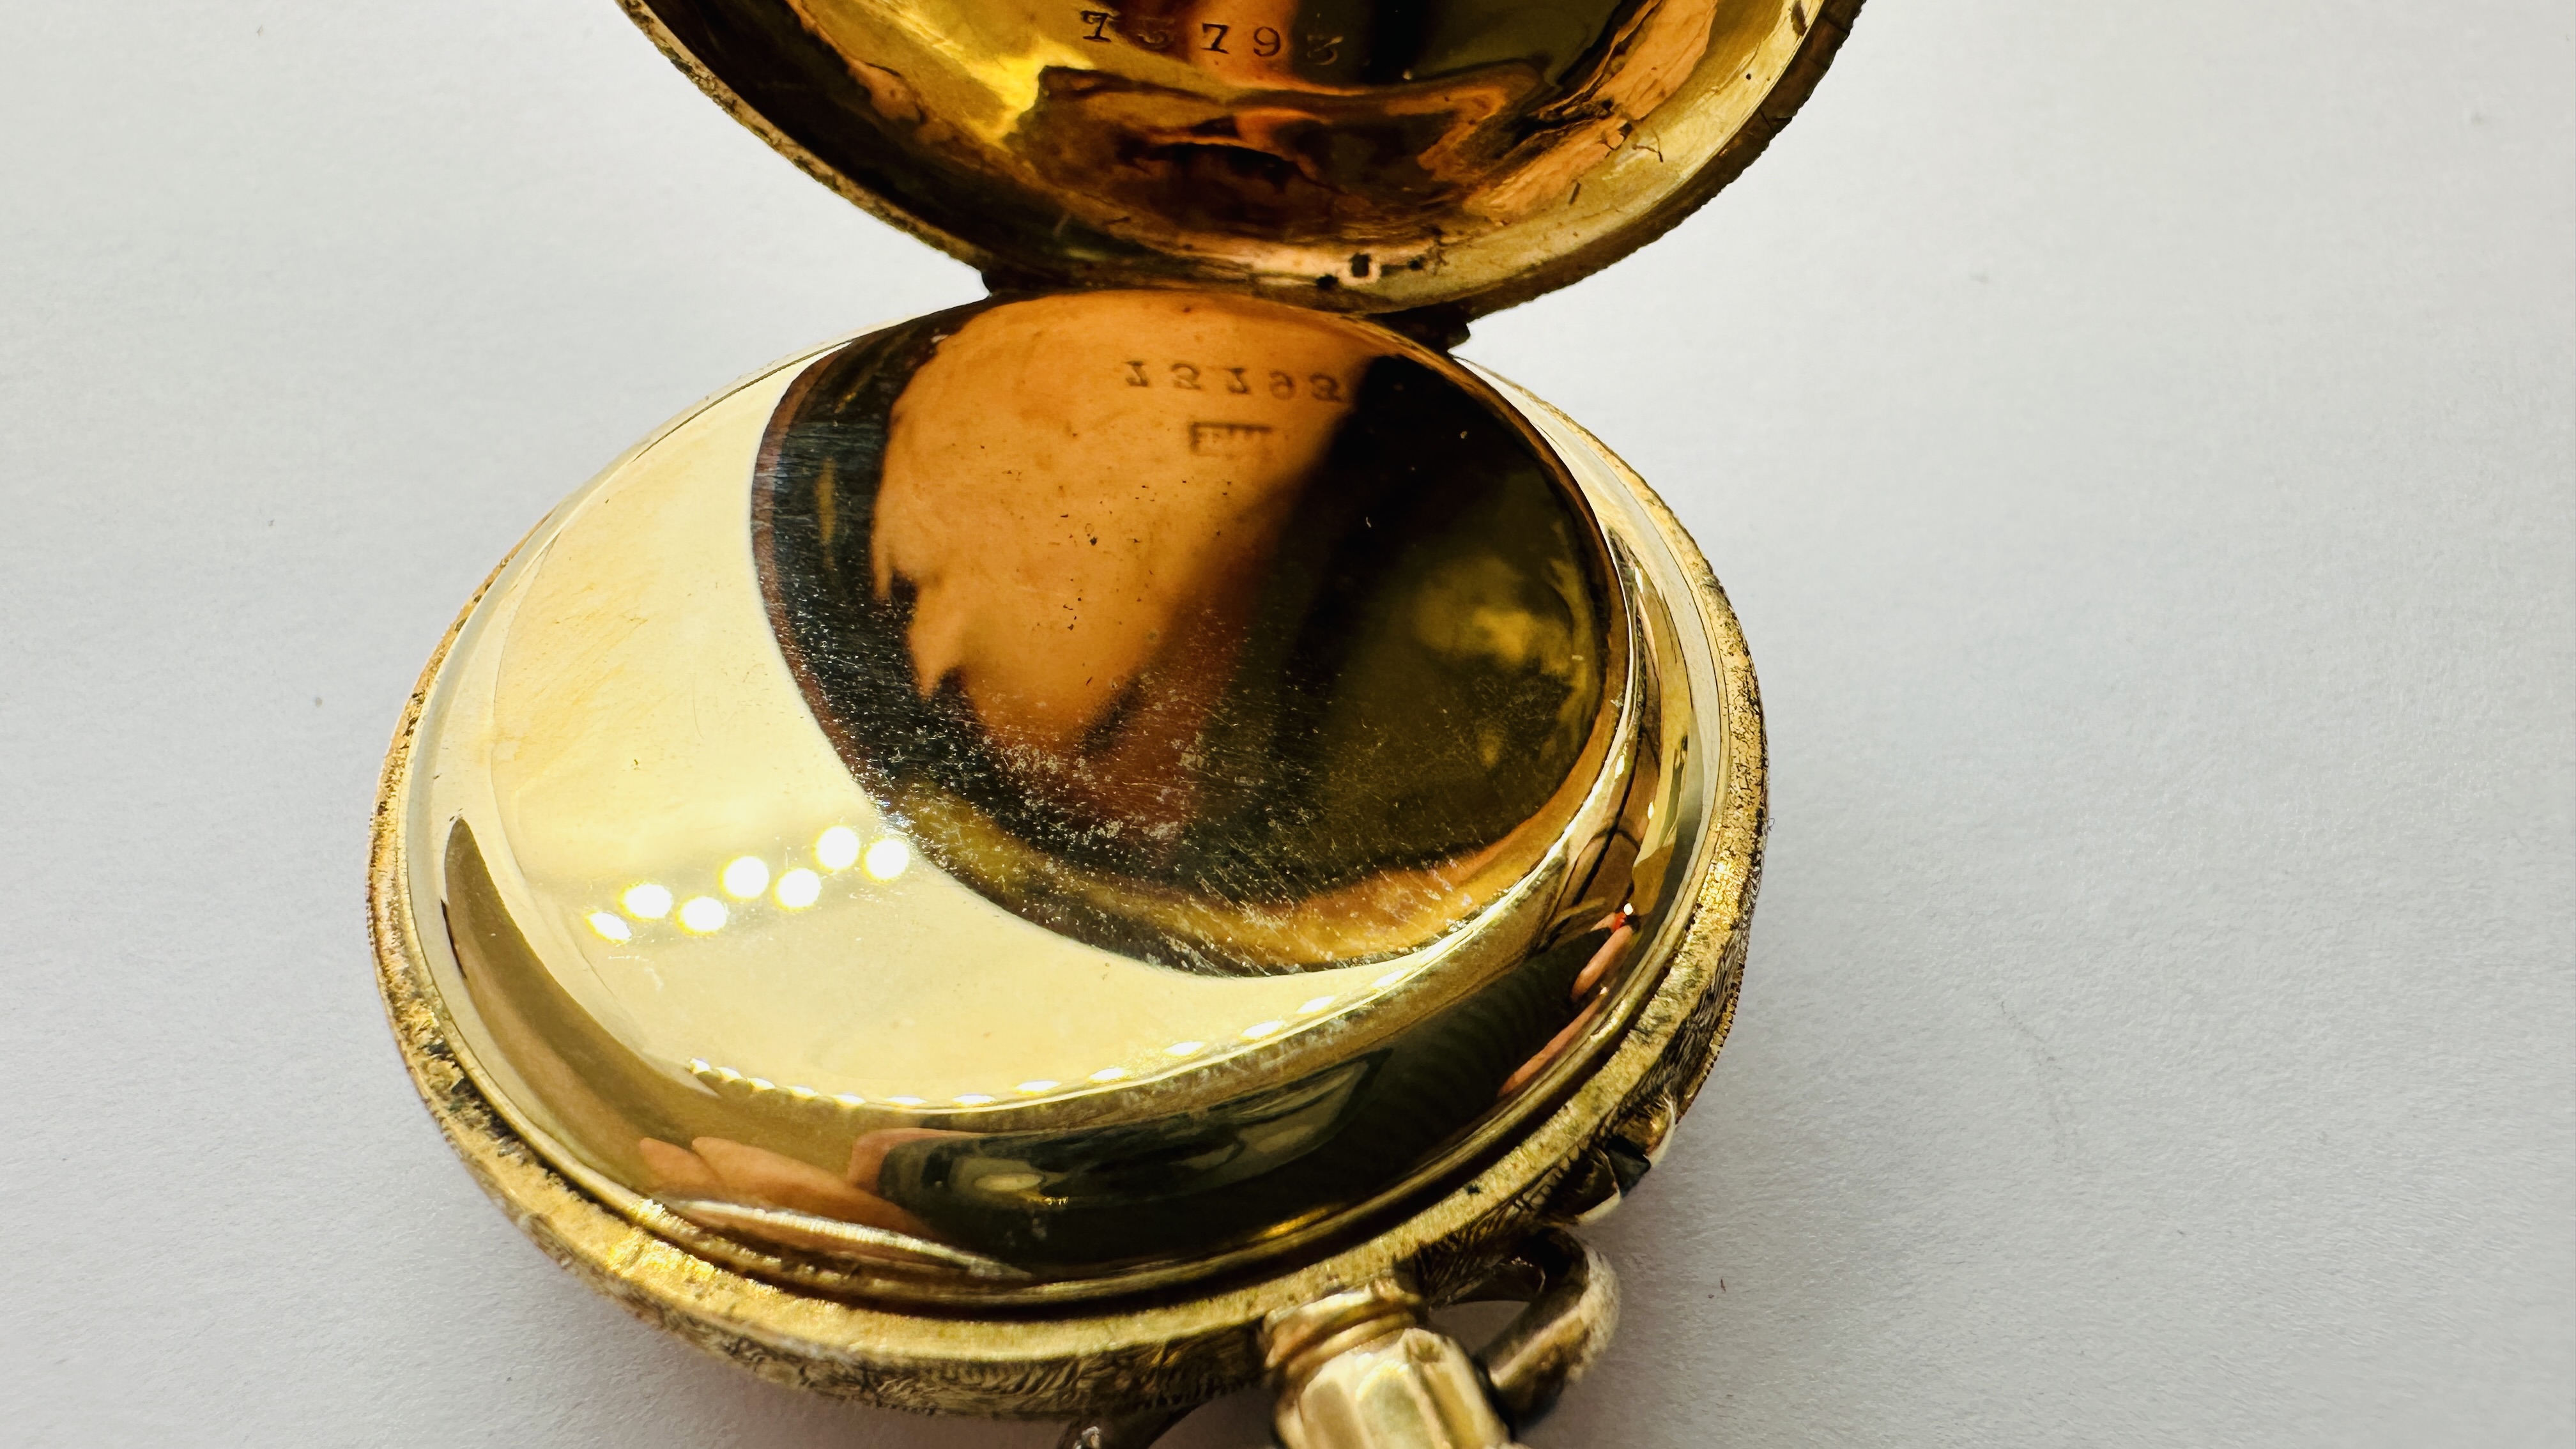 AN ELABORATE ANTIQUE 18CT GOLD CASED HALF HUNTER POCKET WATCH ALONG WITH A WOVEN WATCH CHAIN, - Image 17 of 17